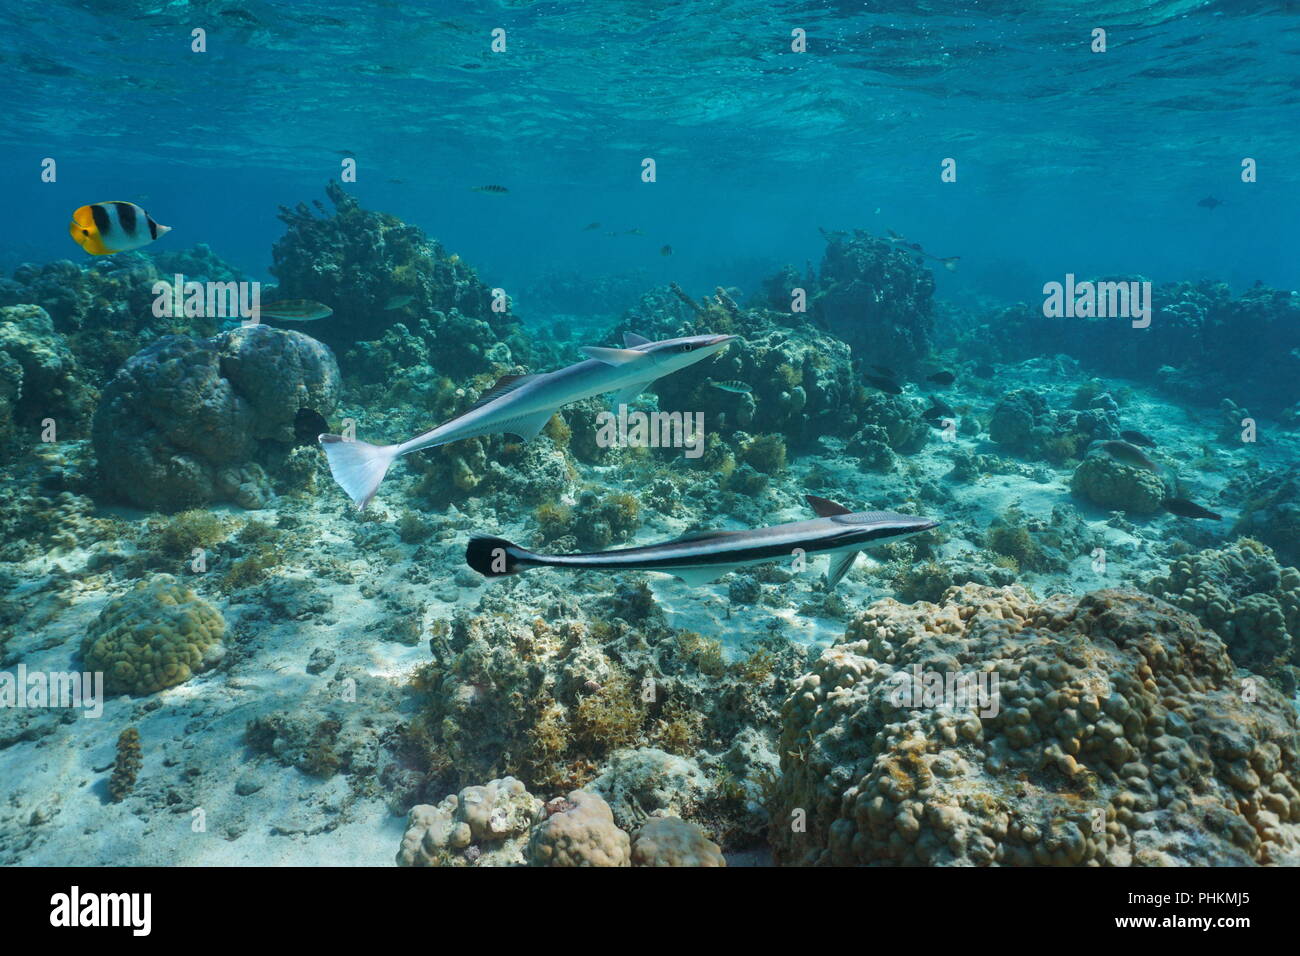 Underwater two remora fish, live sharksucker, Echeneis naucrates, with corals in the lagoon, Pacific ocean, French Polynesia Stock Photo